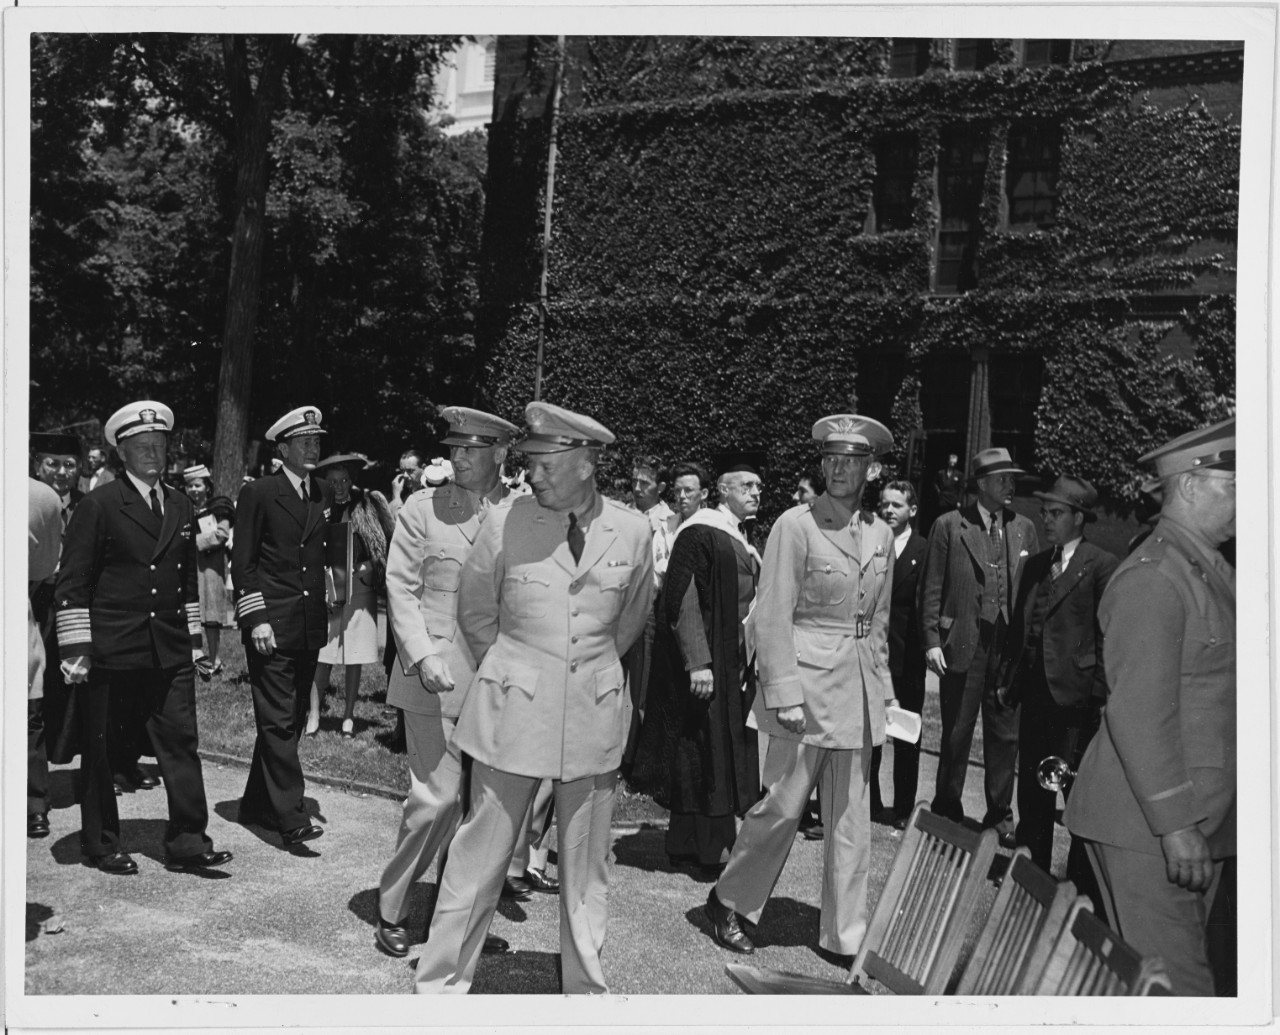 Photo #: NH 58354  General of the Army Dwight D. Eisenhower